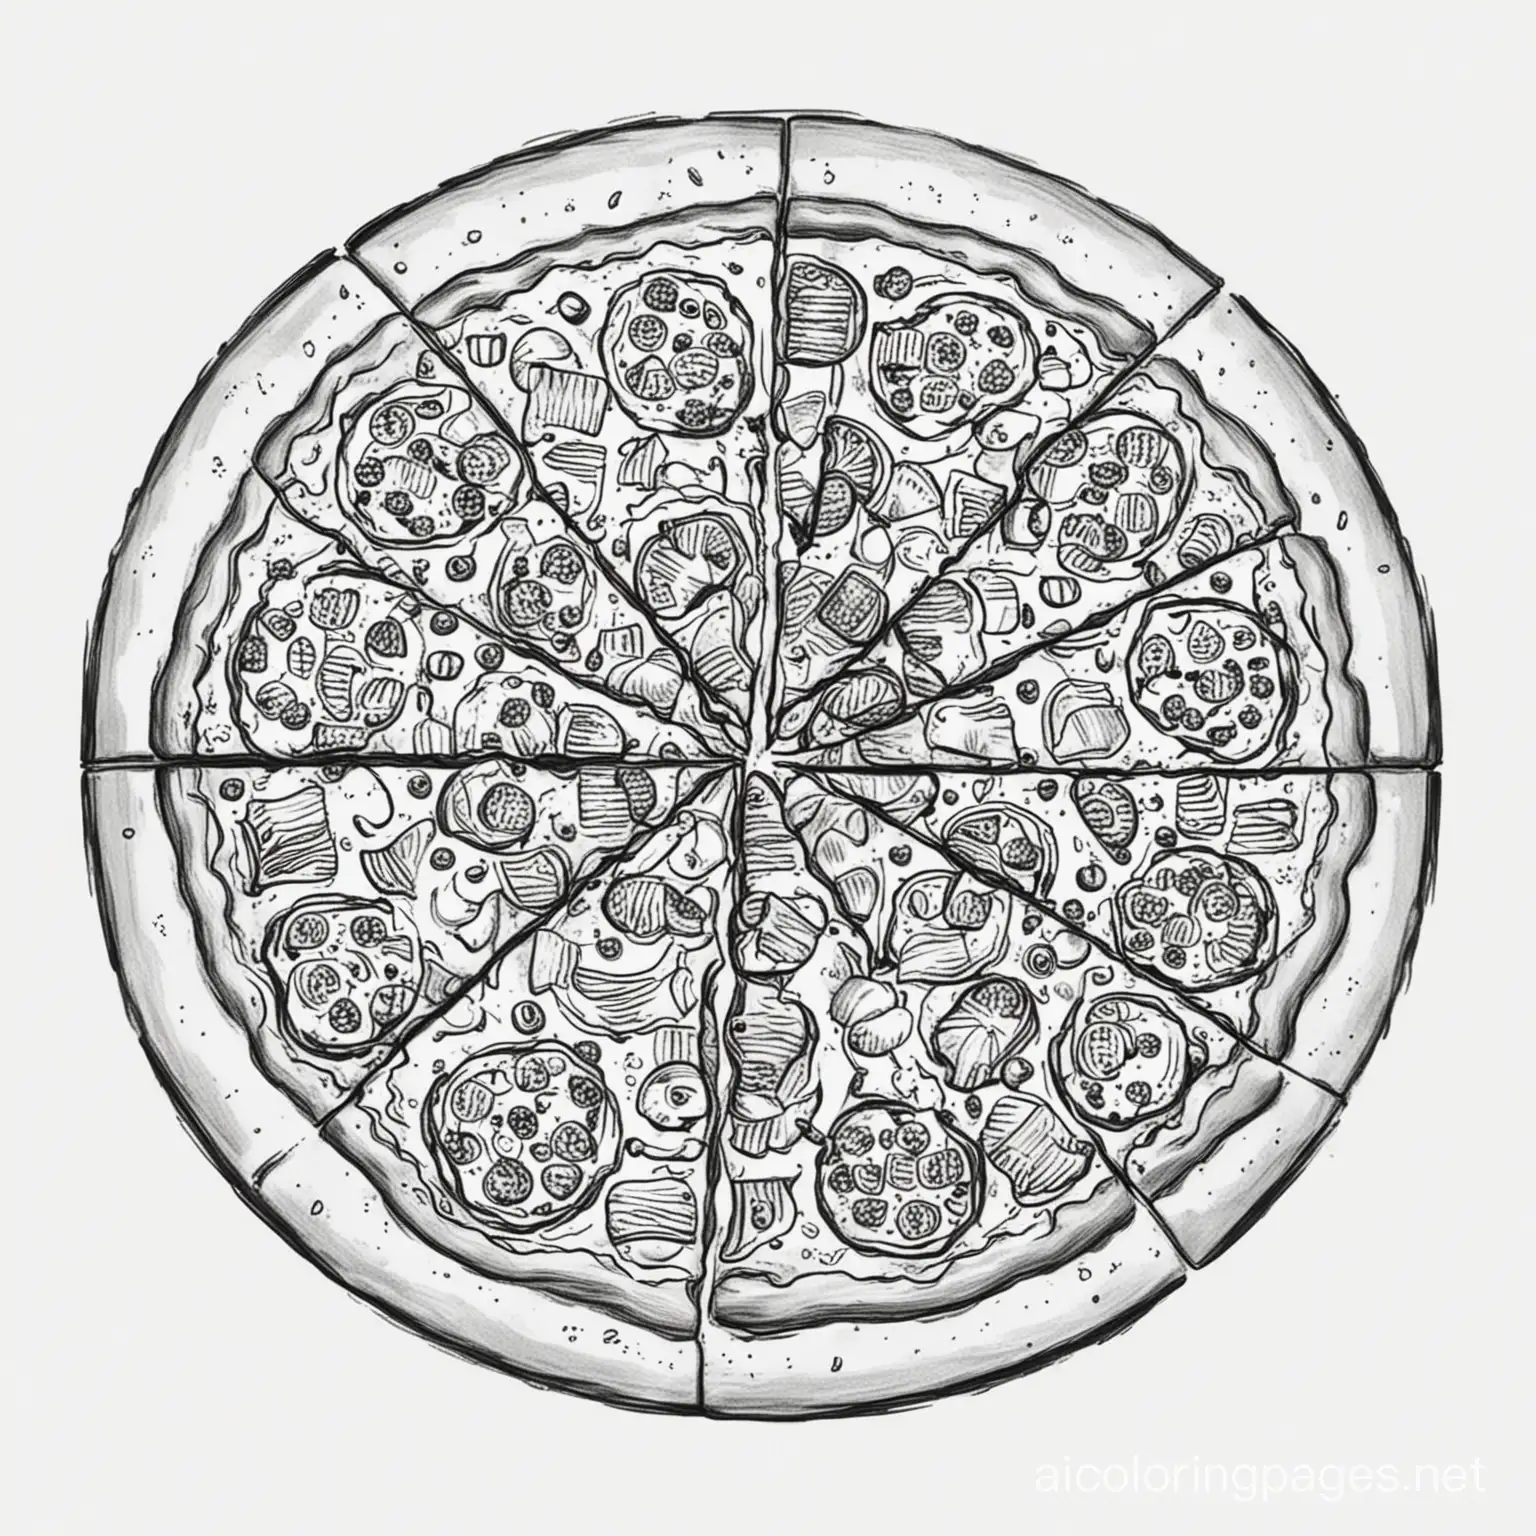 Pizza, Coloring Page, black and white, line art, white background, Simplicity, Ample White Space. The background of the coloring page is plain white to make it easy for young children to color within the lines. The outlines of all the subjects are easy to distinguish, making it simple for kids to color without too much difficulty